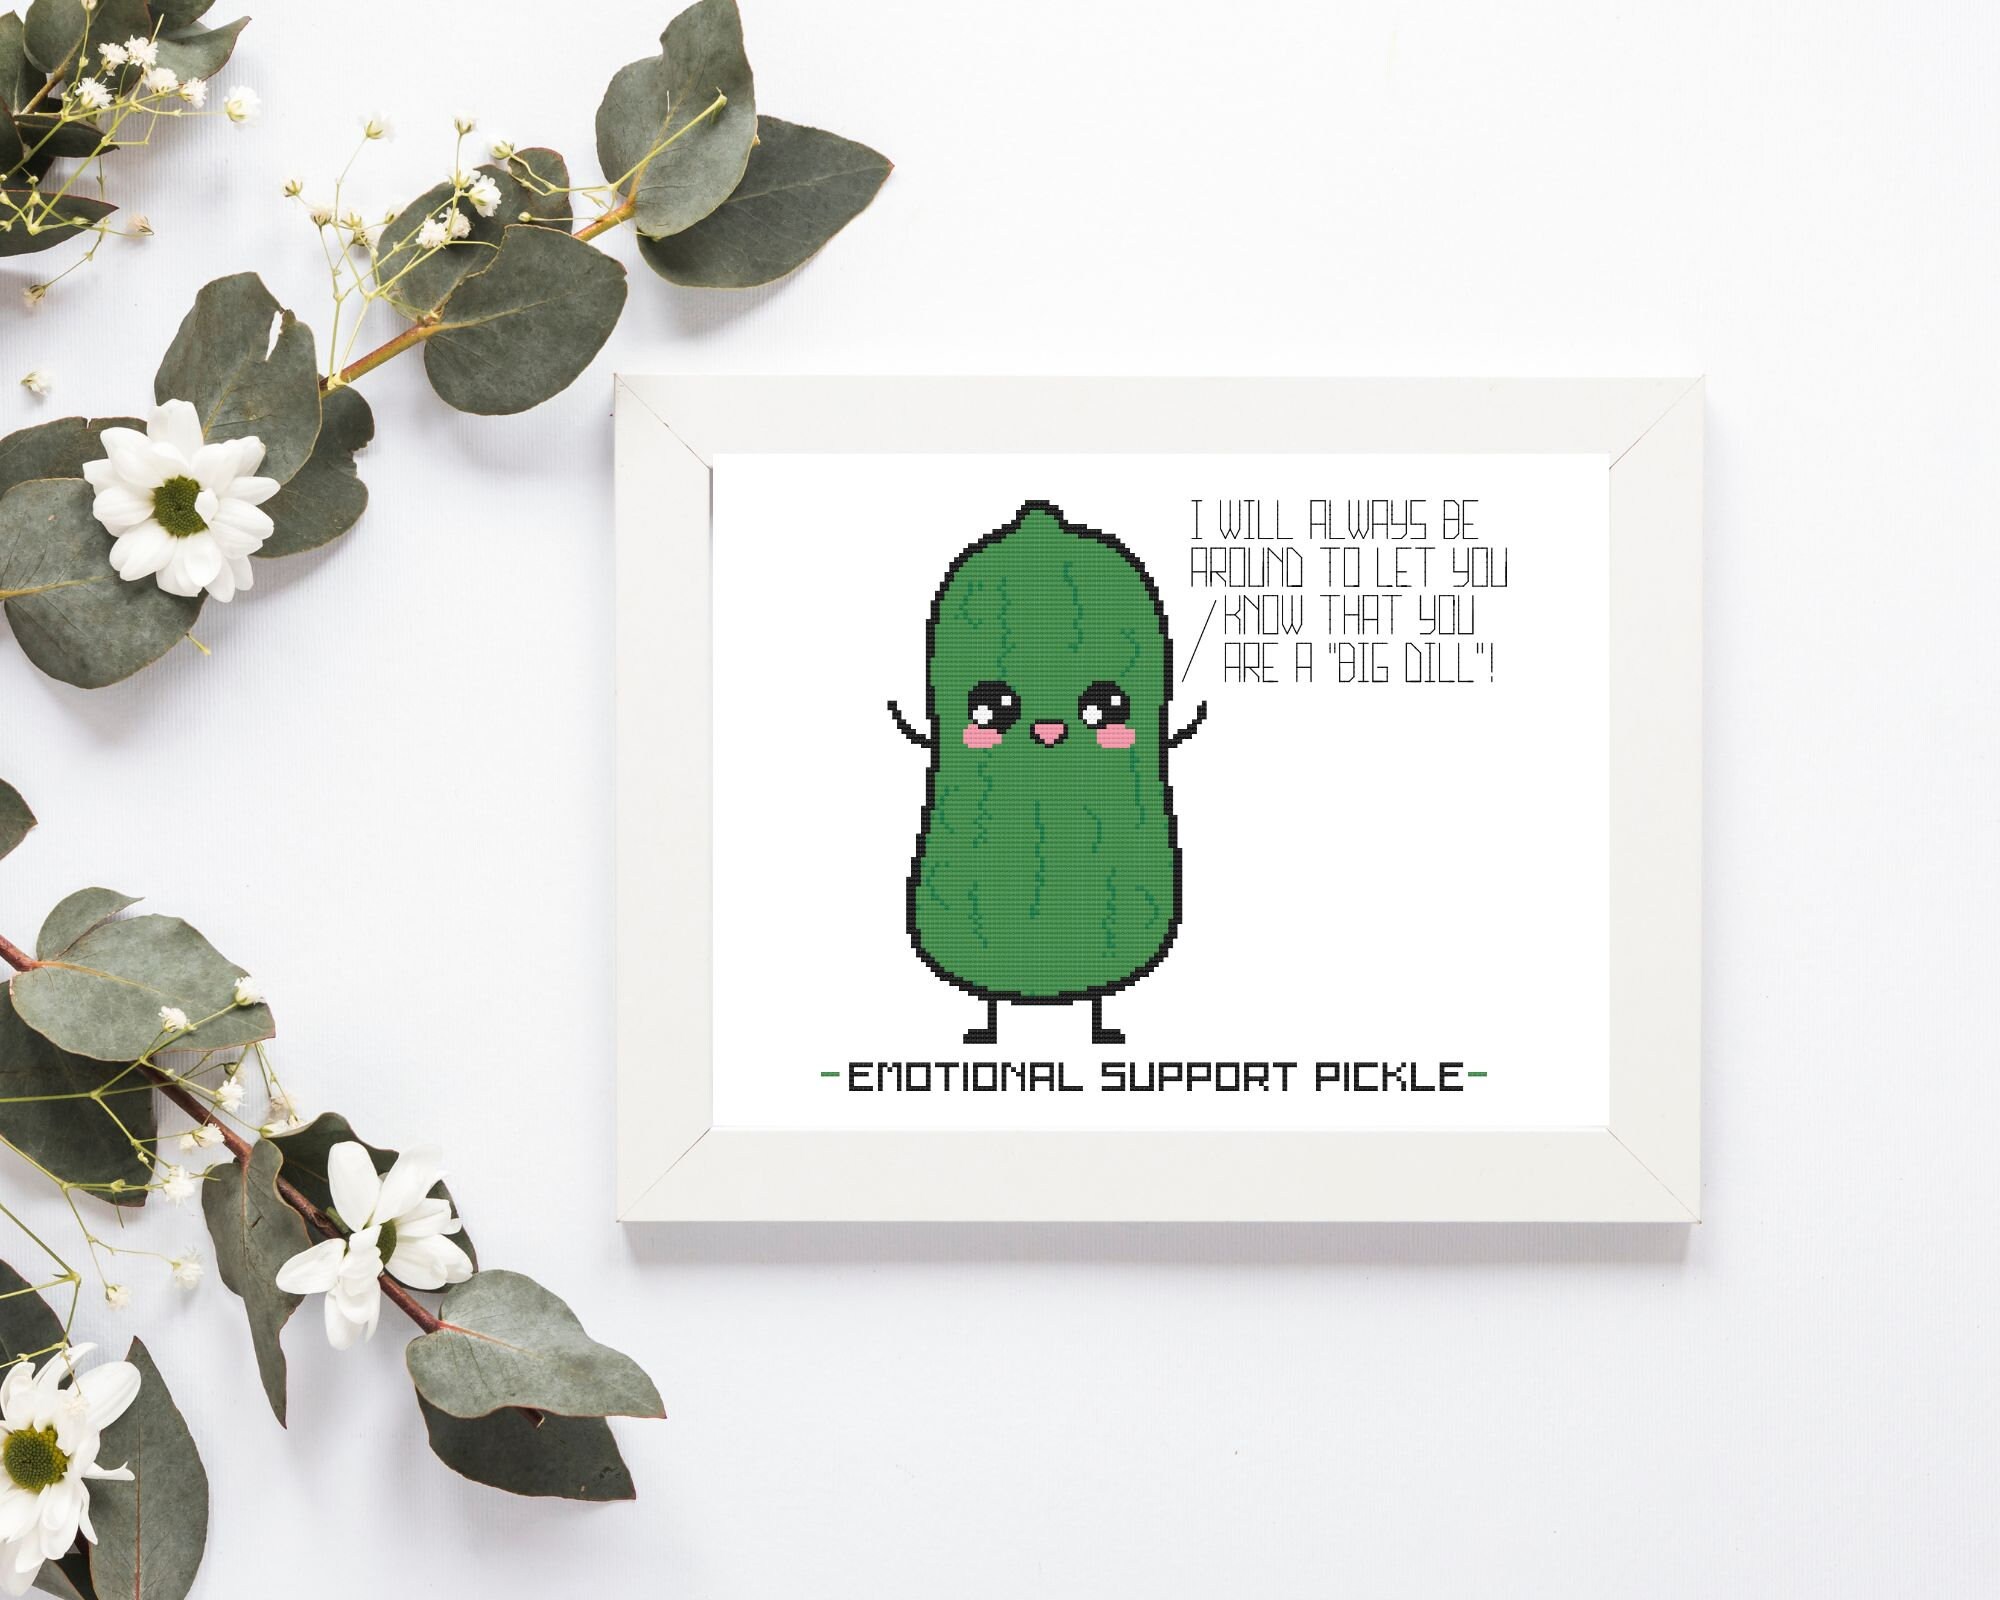 PATTERN PACK: Crochet Emotional Support Worm, Pickle, Potato